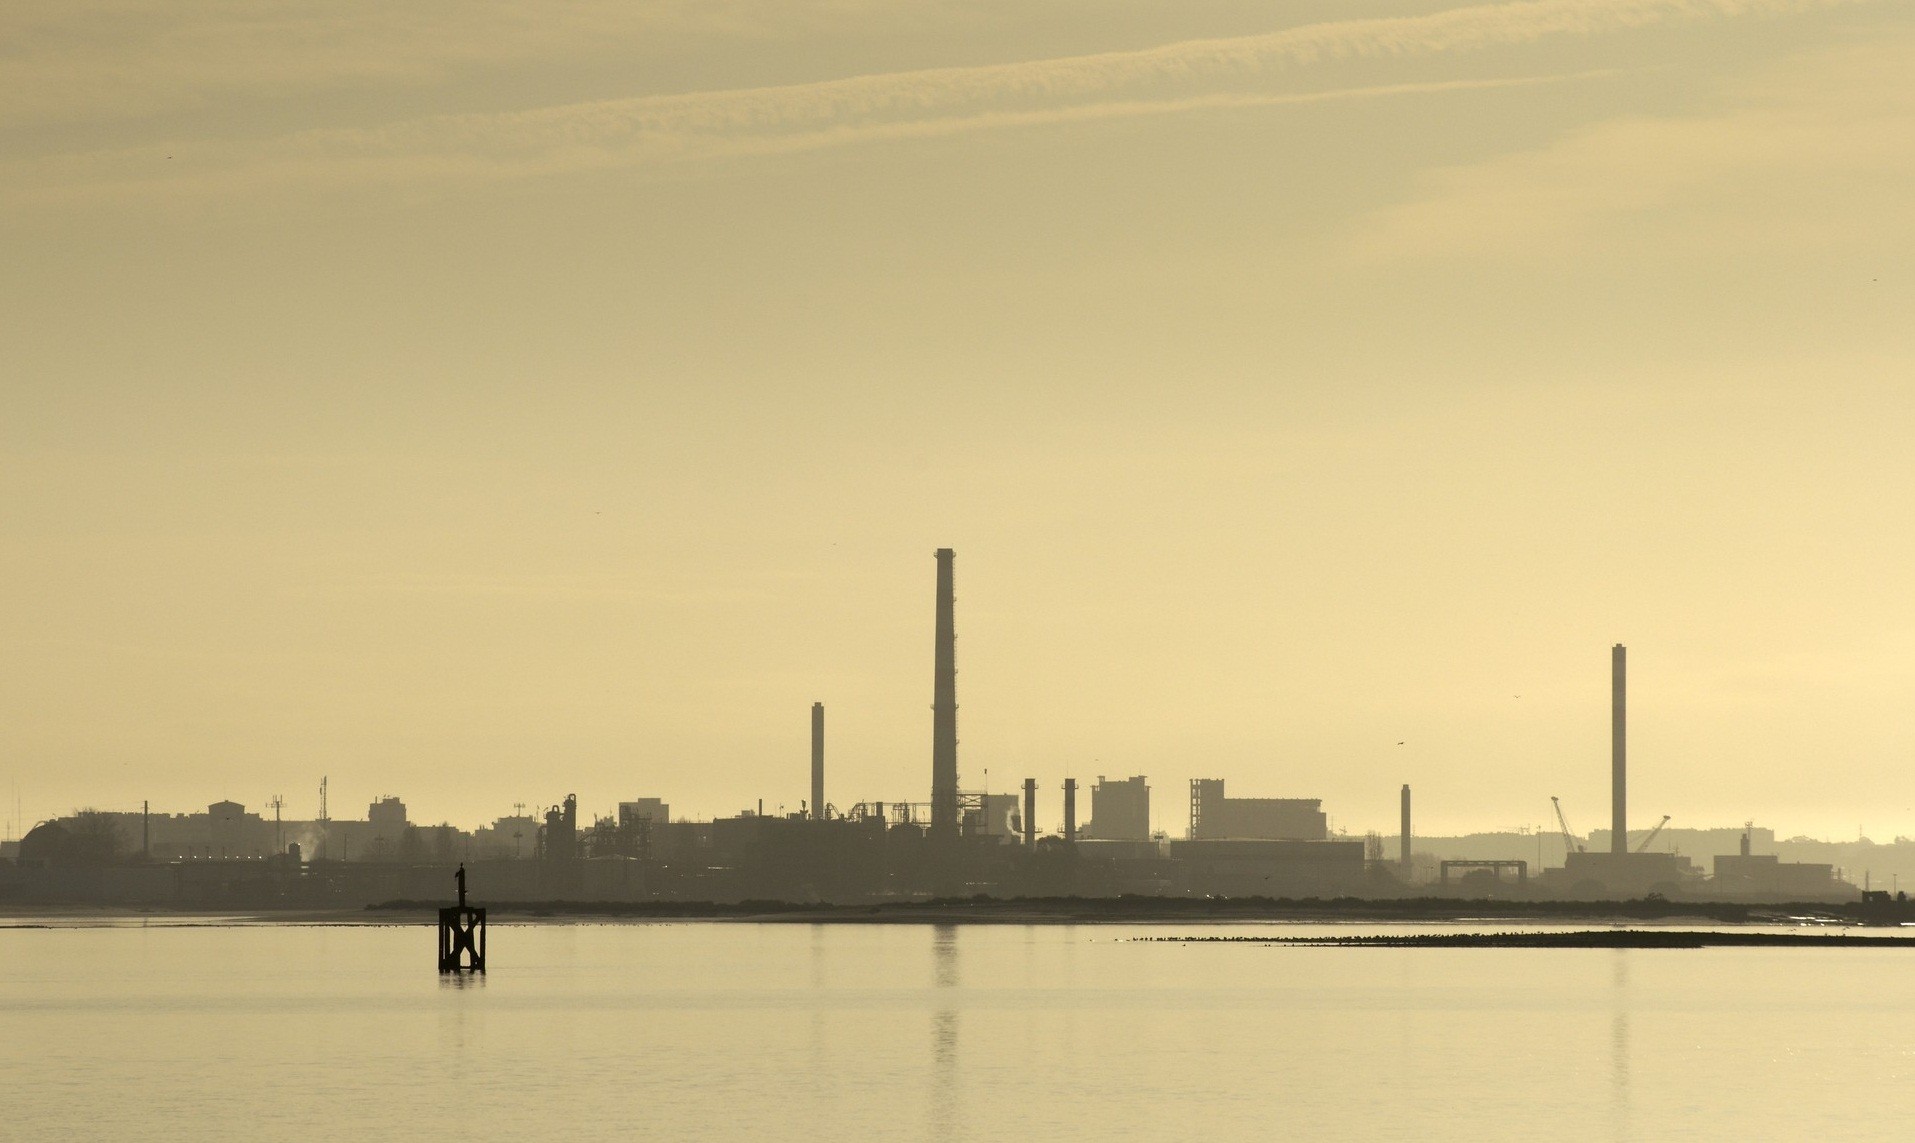 photography, Industrial, Technology, Chimneys, Factories, Sea, Water, Reflection Wallpaper